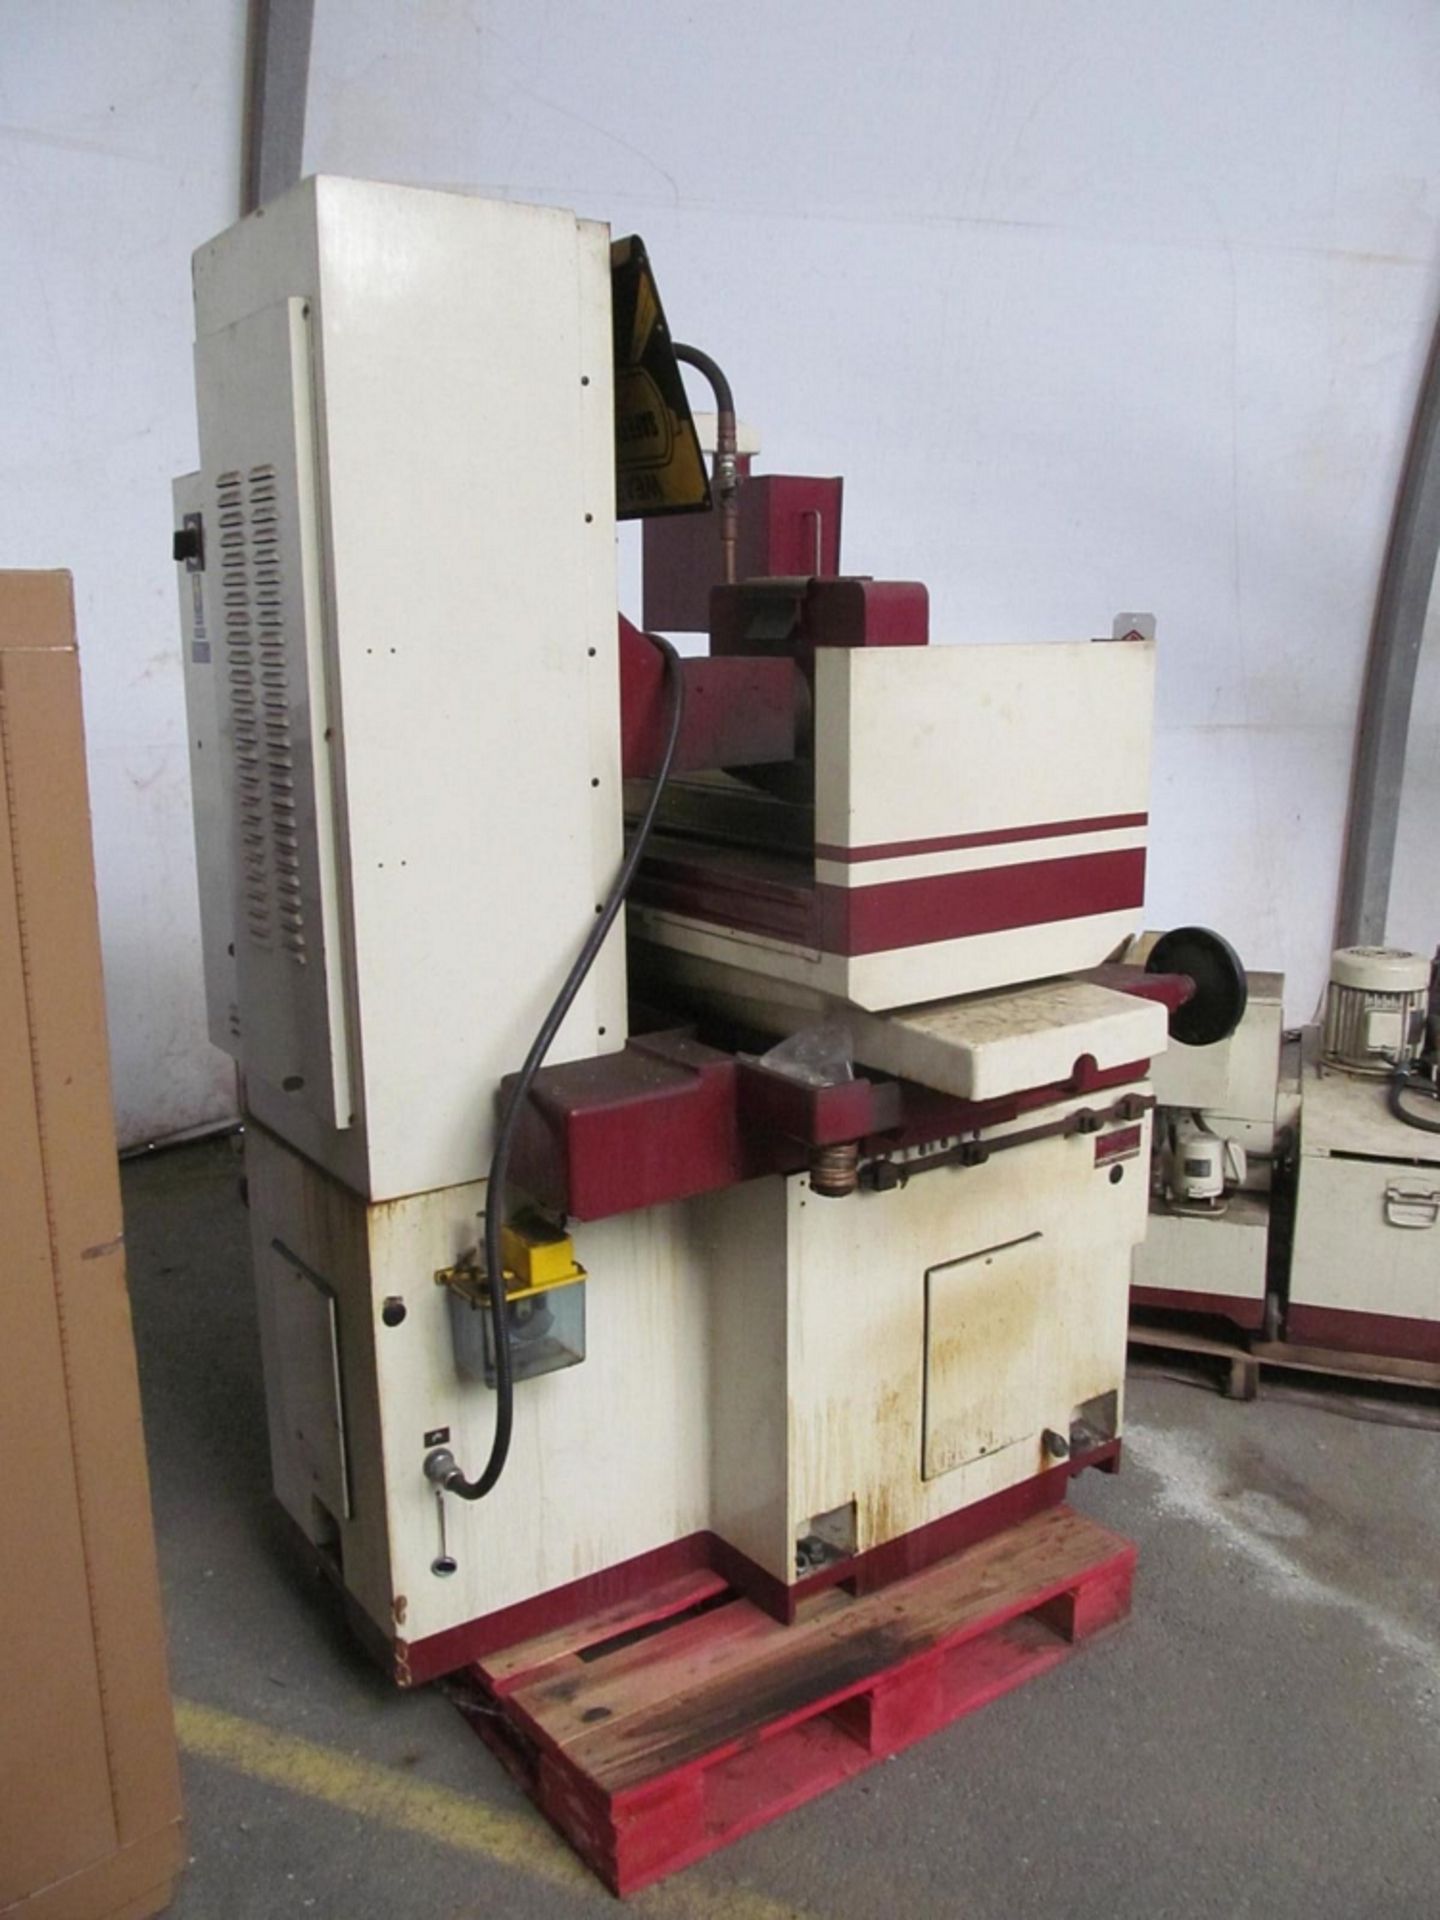 CHEVALIER FSG-3A1224H HYDRAULIC SURFACE GRINDER, S/N P3798003, 12” X 24” ELECTRO-MAGNETIC CHUCK, - Image 3 of 4